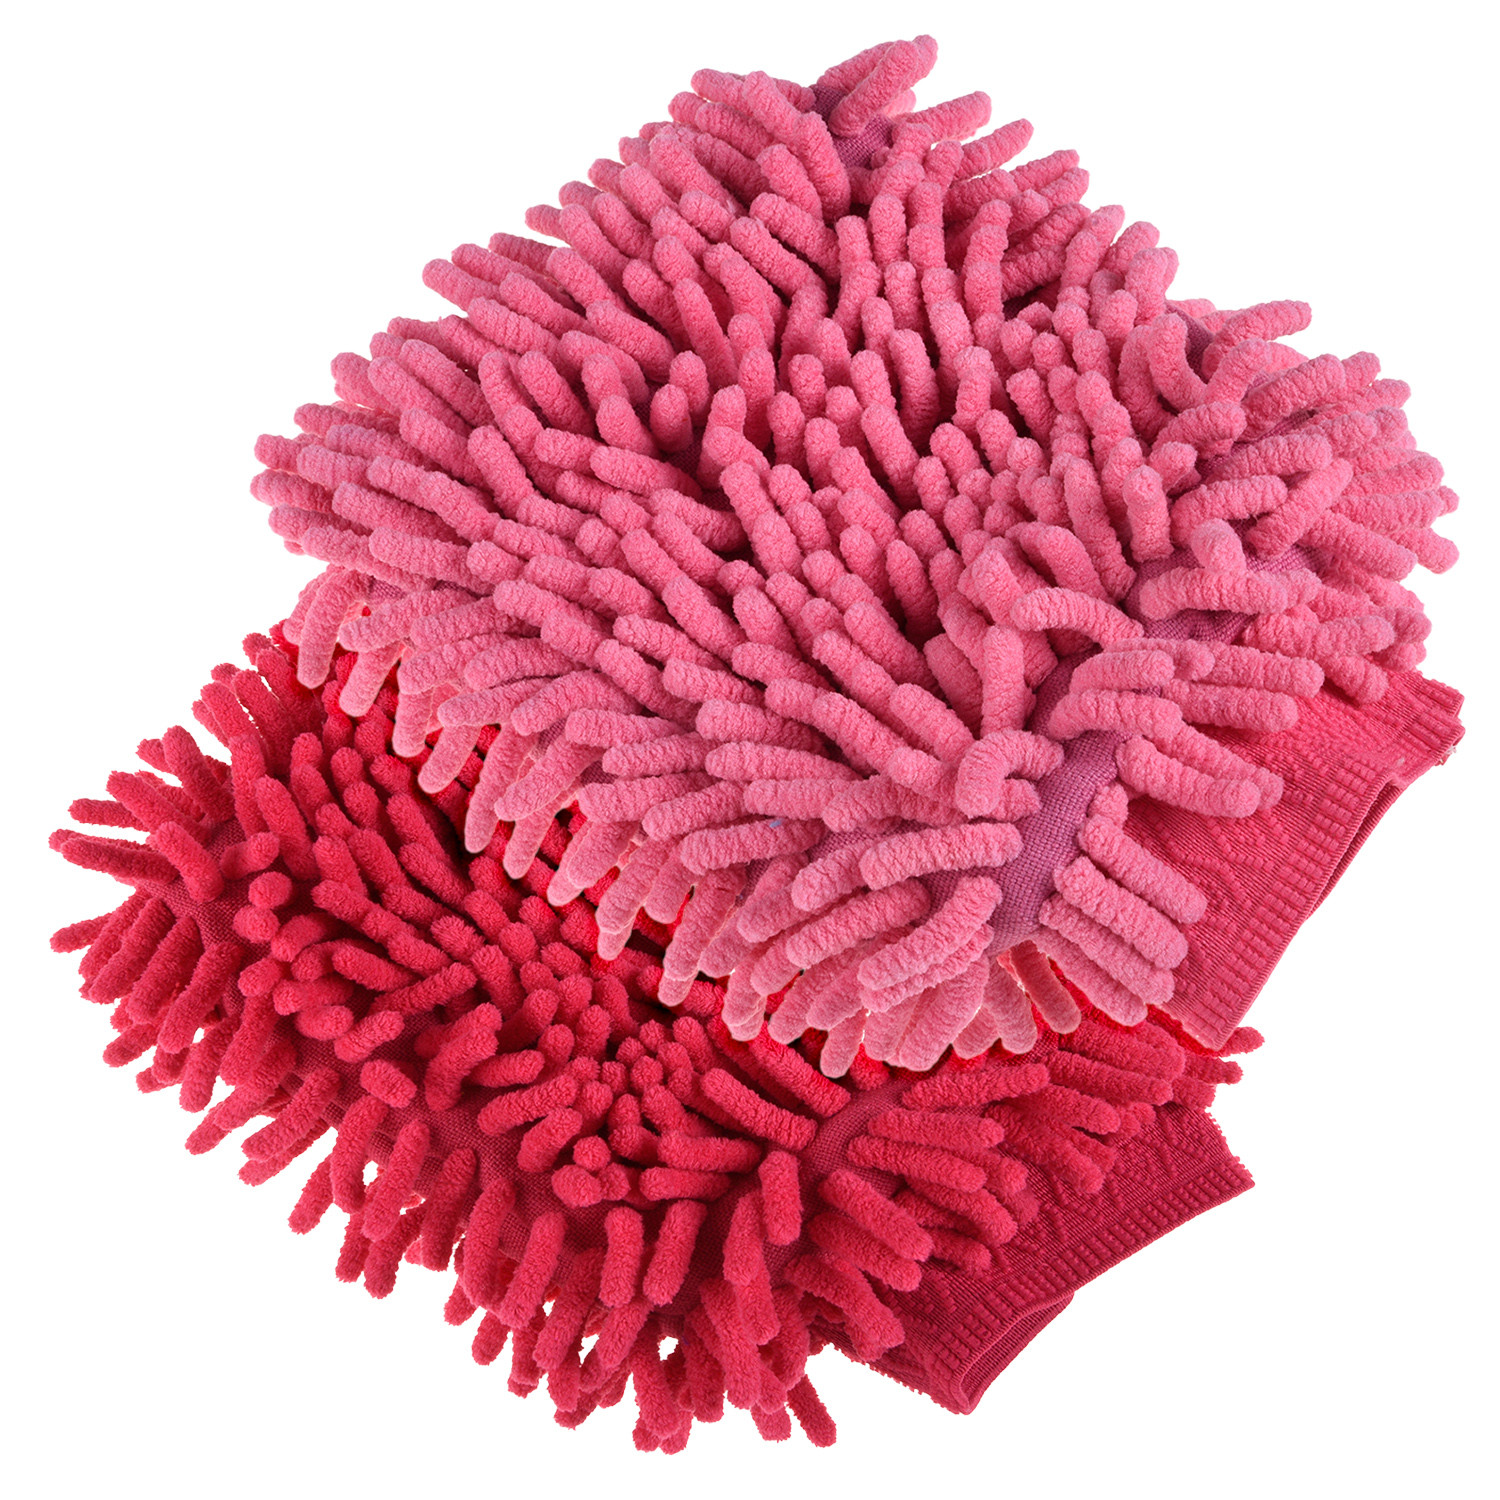 Kuber Industries Chenille Mitts|Microfiber Cleaning Gloves|Inside Waterproof Cloth Gloves|100 Gram Weighted Hand Duster|Chenille Gloves For Car|Glass|Pack of 2 (Pink & Dark Pink)